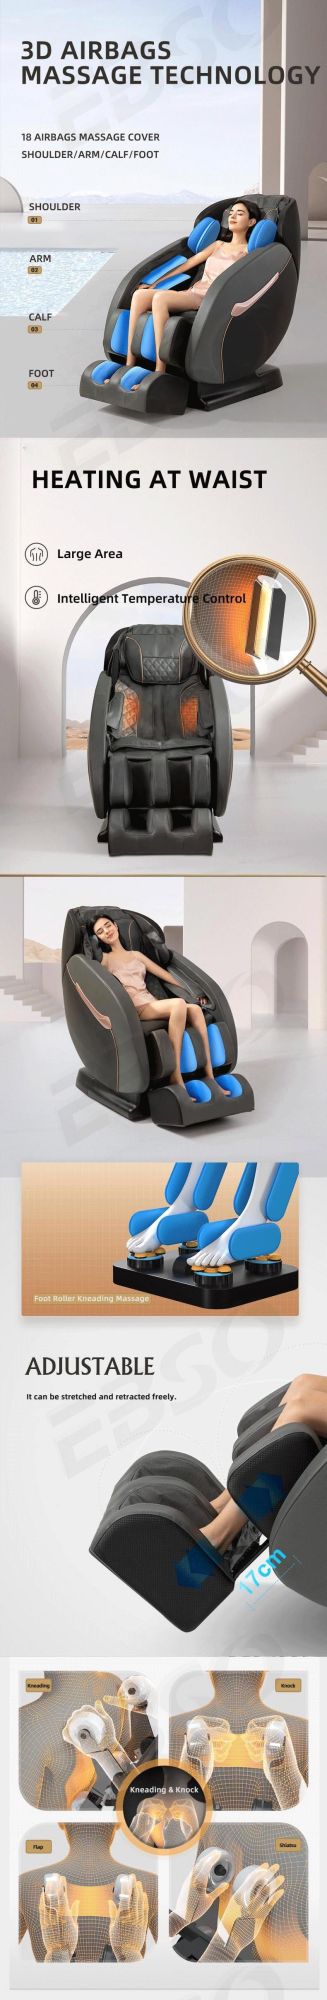 Eo-Hv001 Multi Function Zero Gravity Space Capsule Massage Chair with Competitive Price